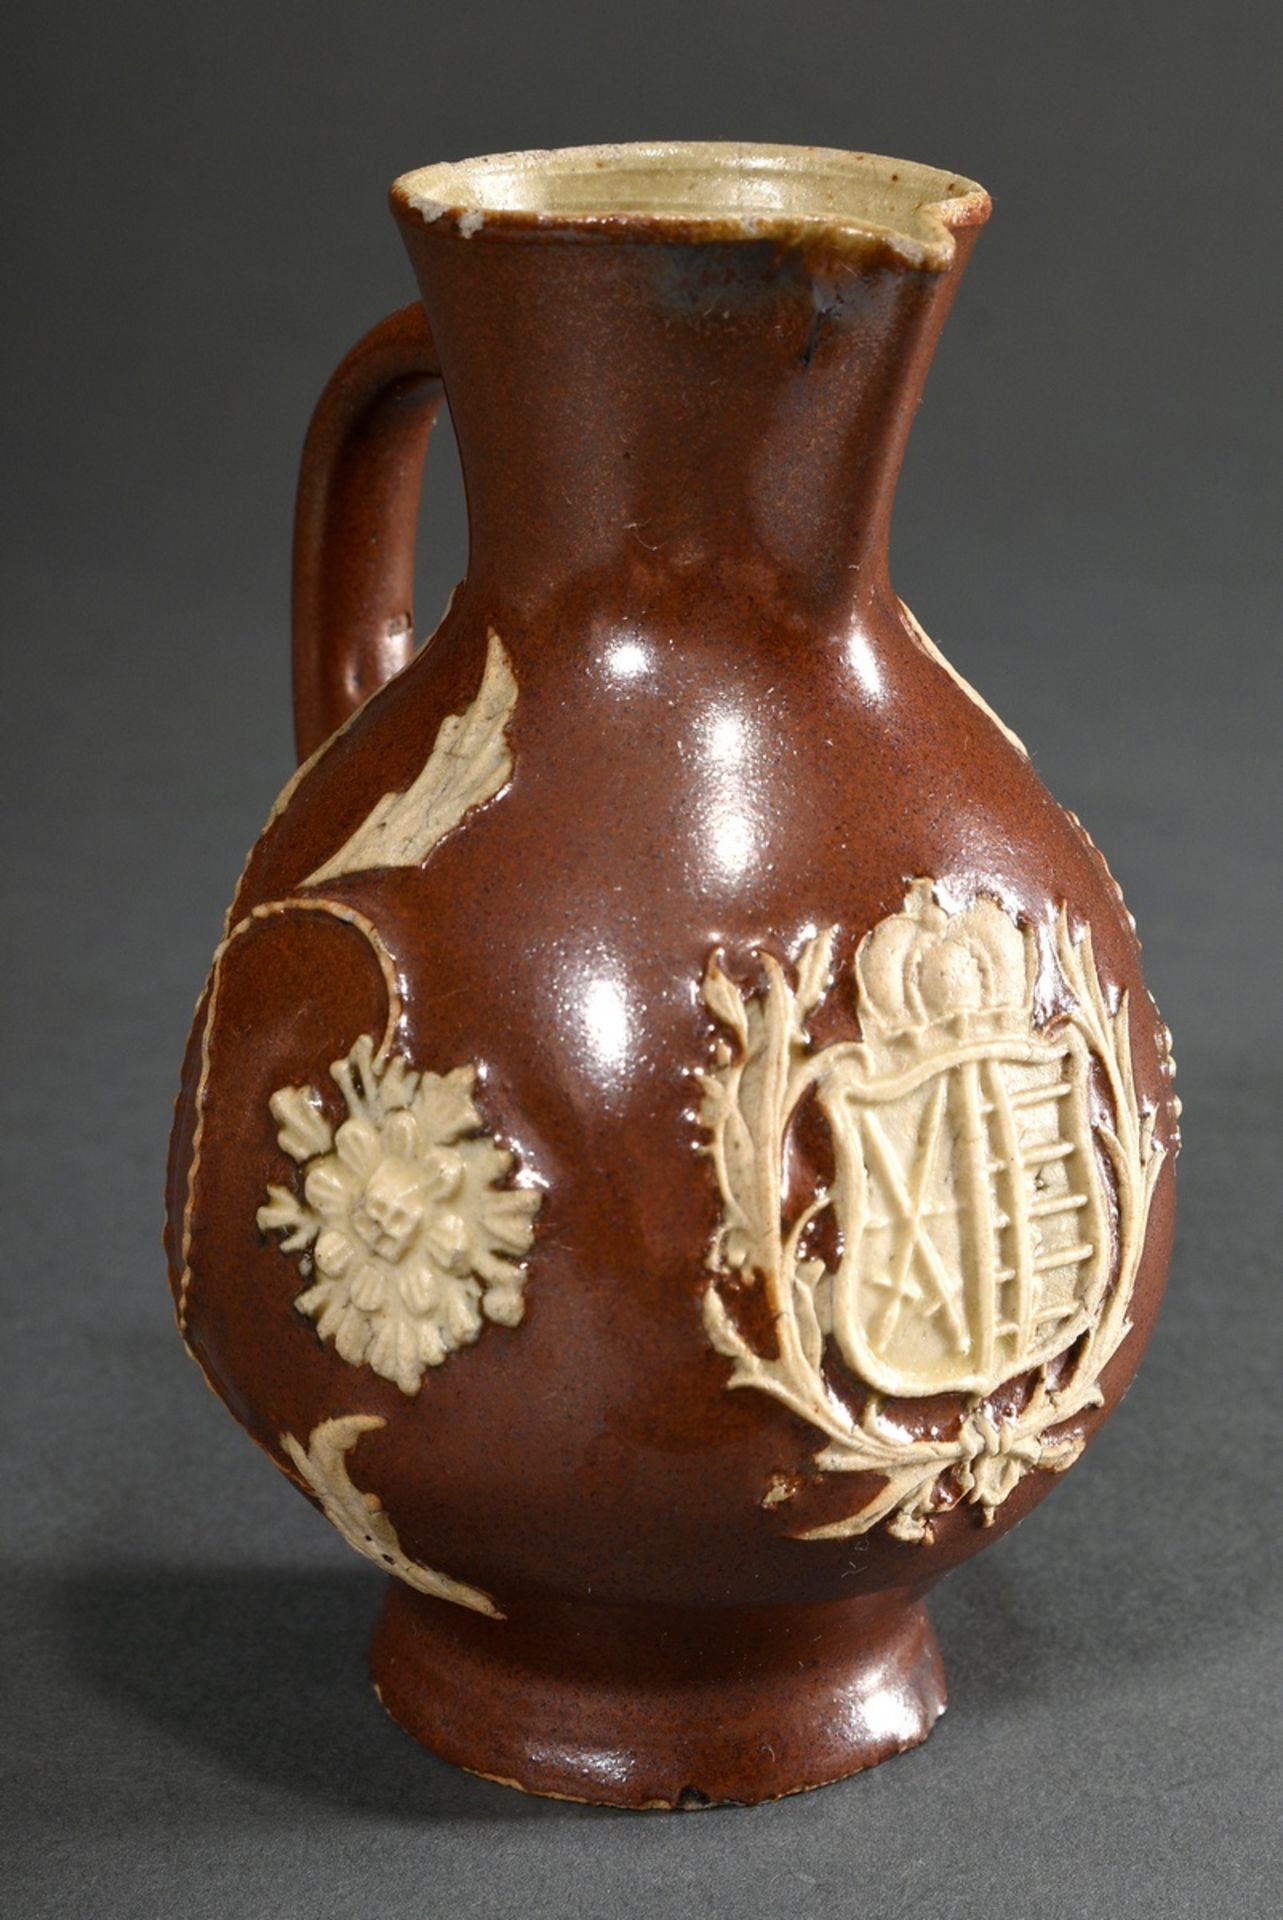 A small Bunzlau jug with Saxon coat of arms, globular form over a slightly flared foot, short funne